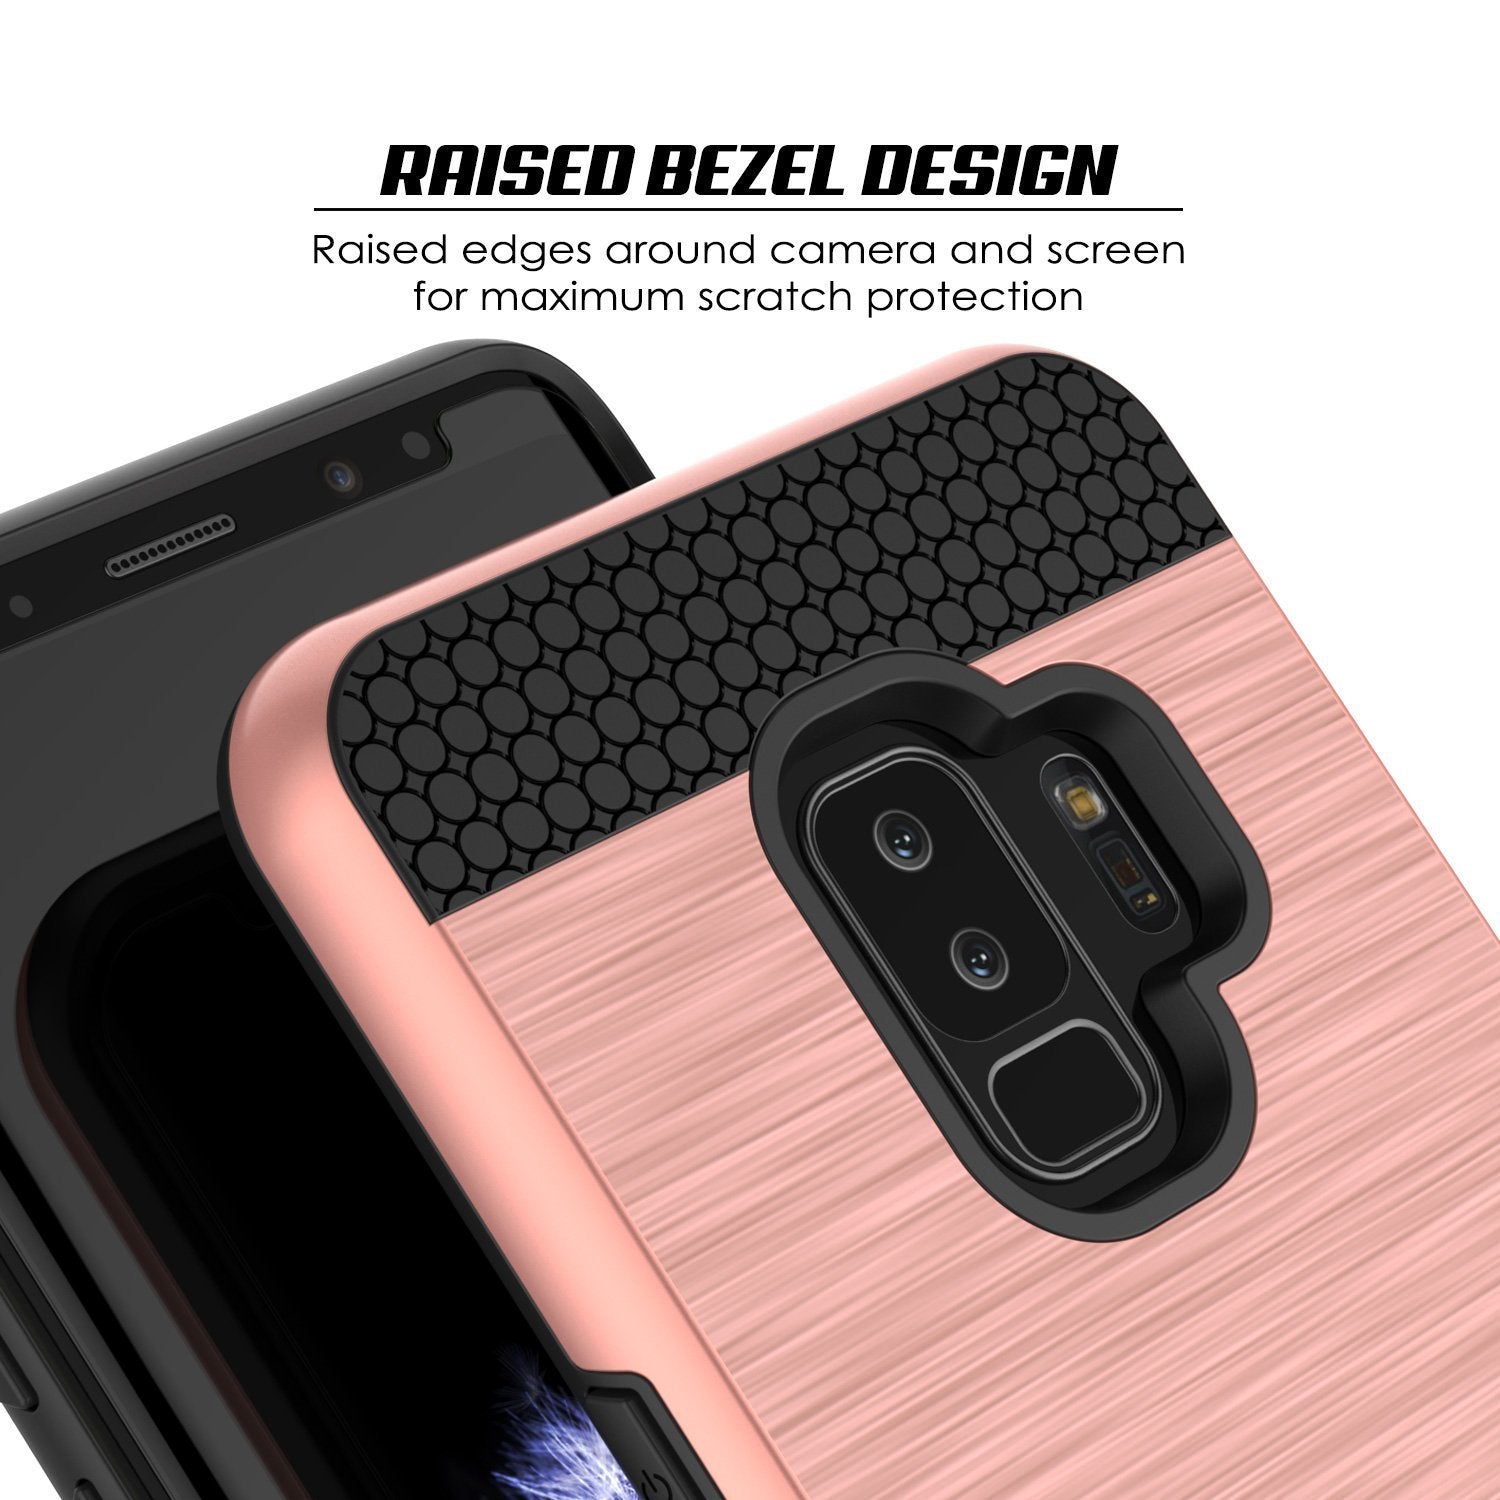 Galaxy S9 Plus Case, PUNKcase [SLOT Series] [Slim Fit] Dual-Layer Armor Cover w/Integrated Anti-Shock System, Credit Card Slot  [Rose Gold]